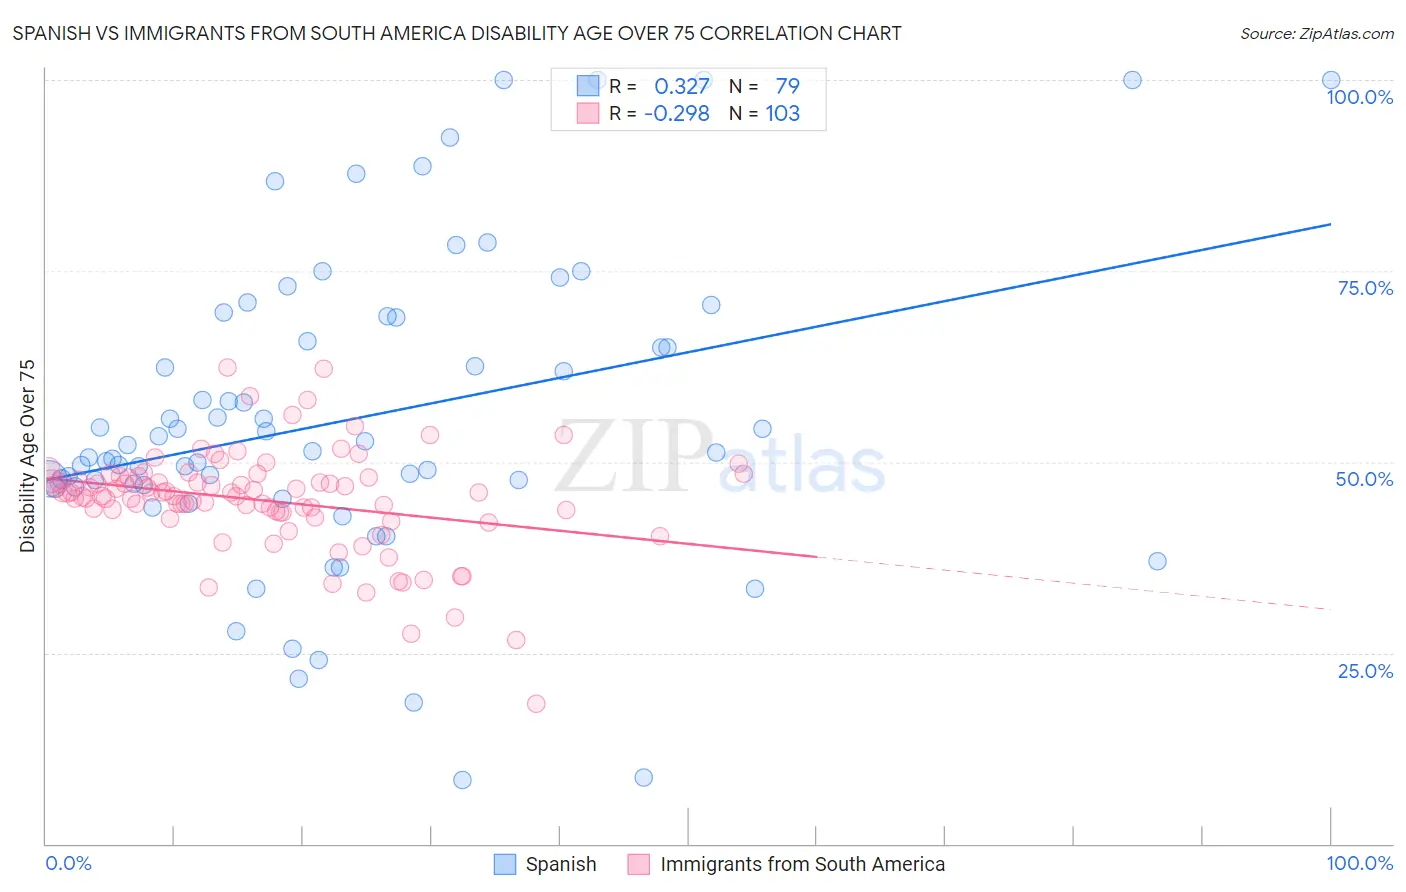 Spanish vs Immigrants from South America Disability Age Over 75